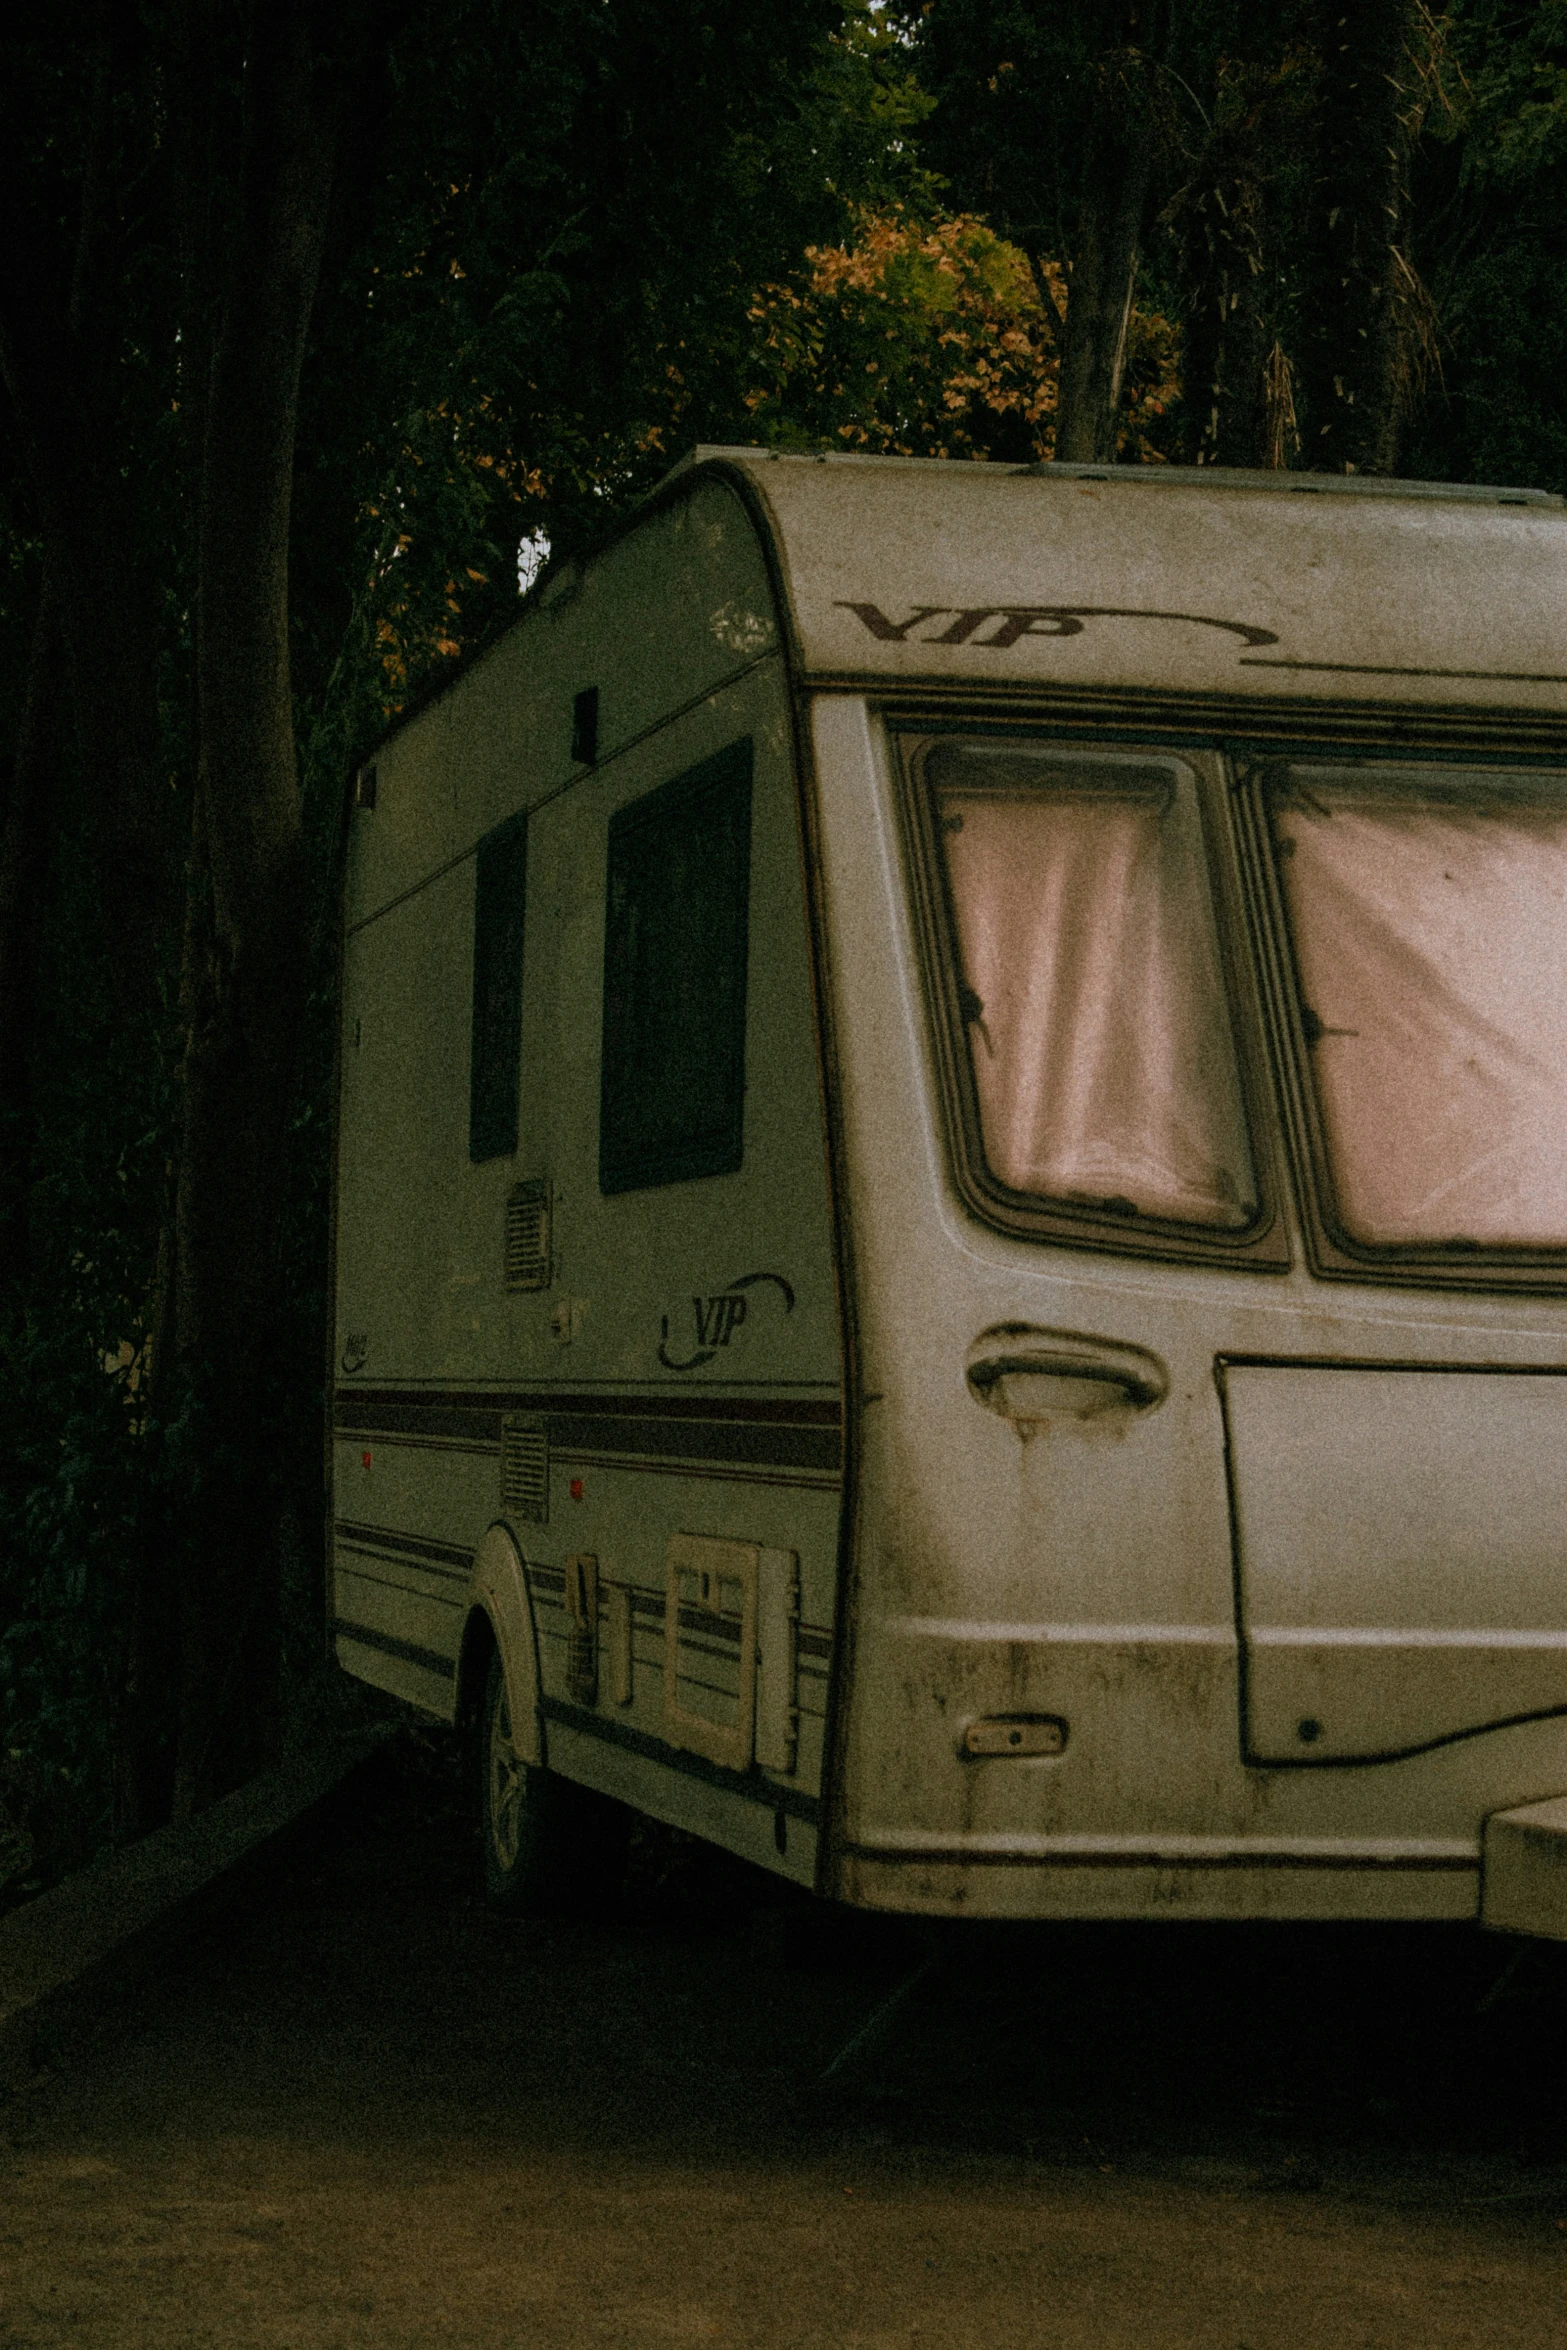 this is an old camper that has been parked on the side of the road